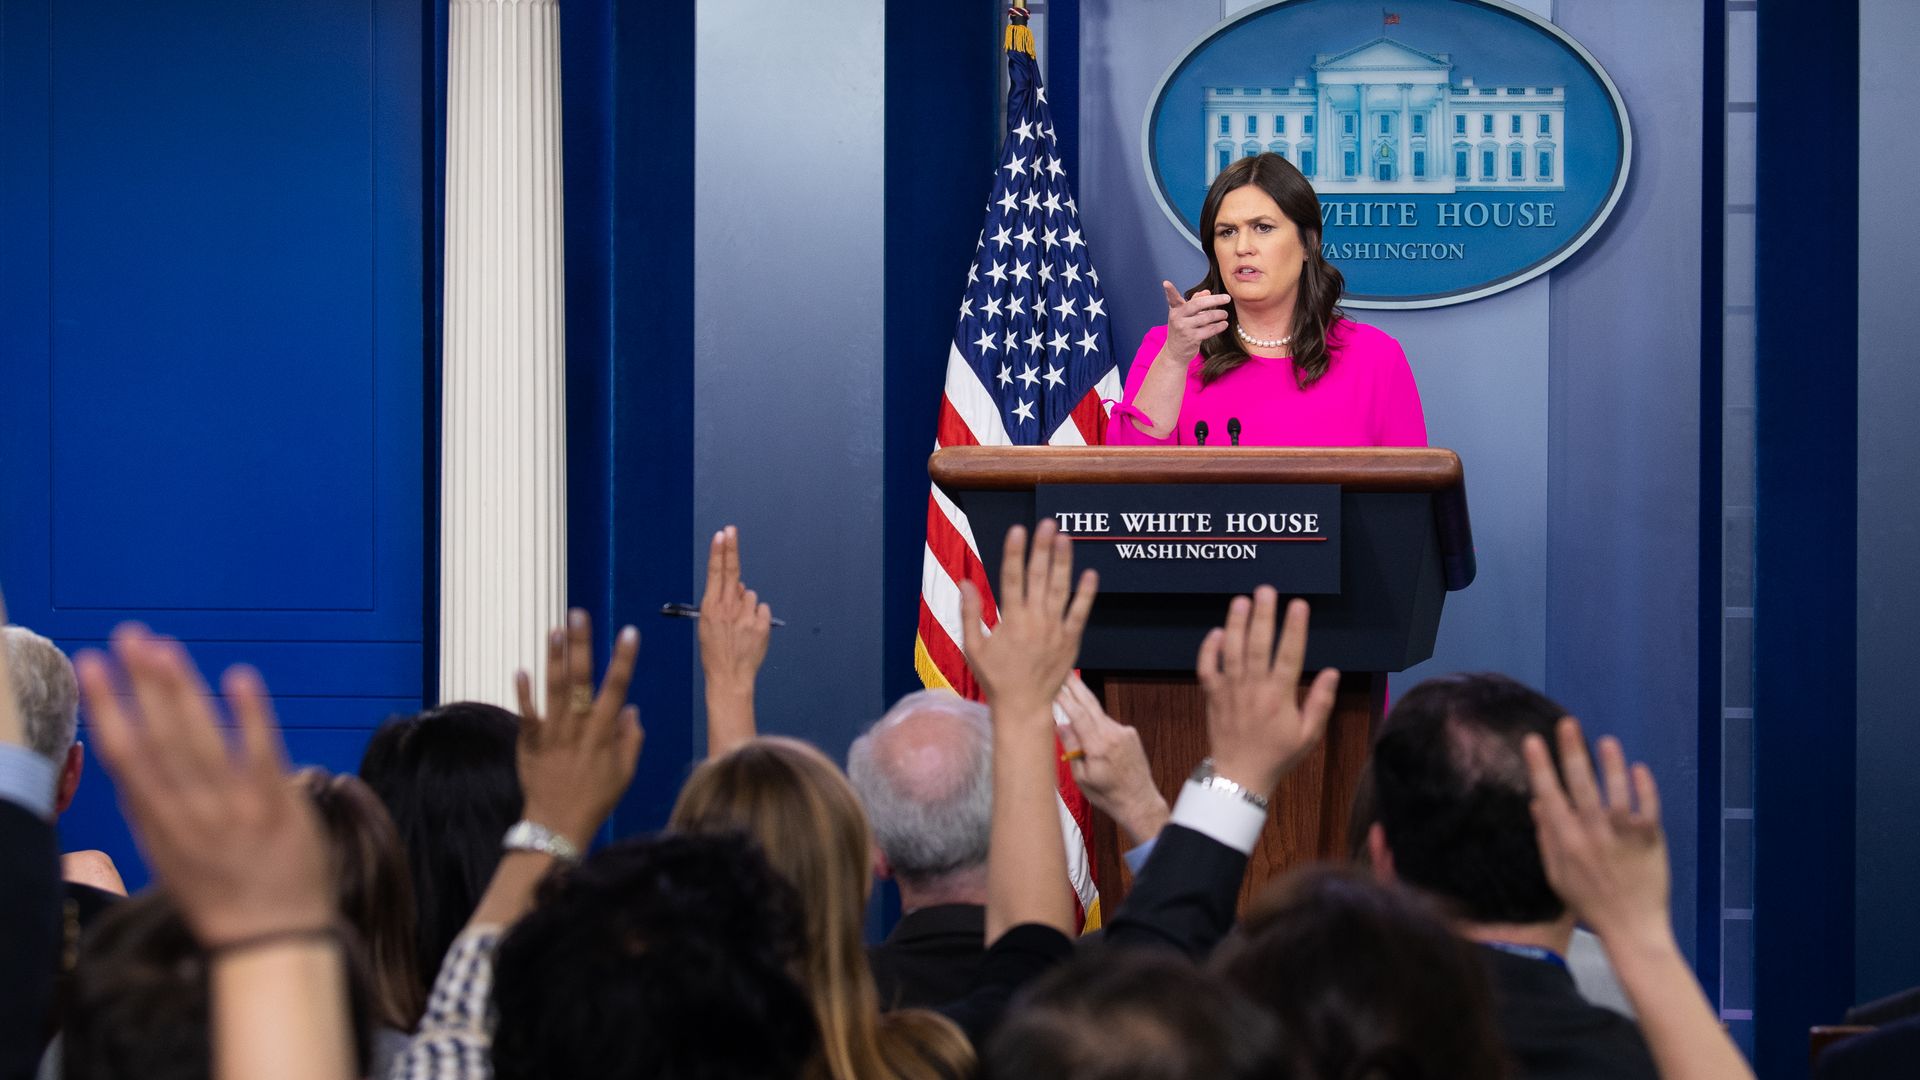 Sarah Sanders in a pink jacket a the White House briefing room stand